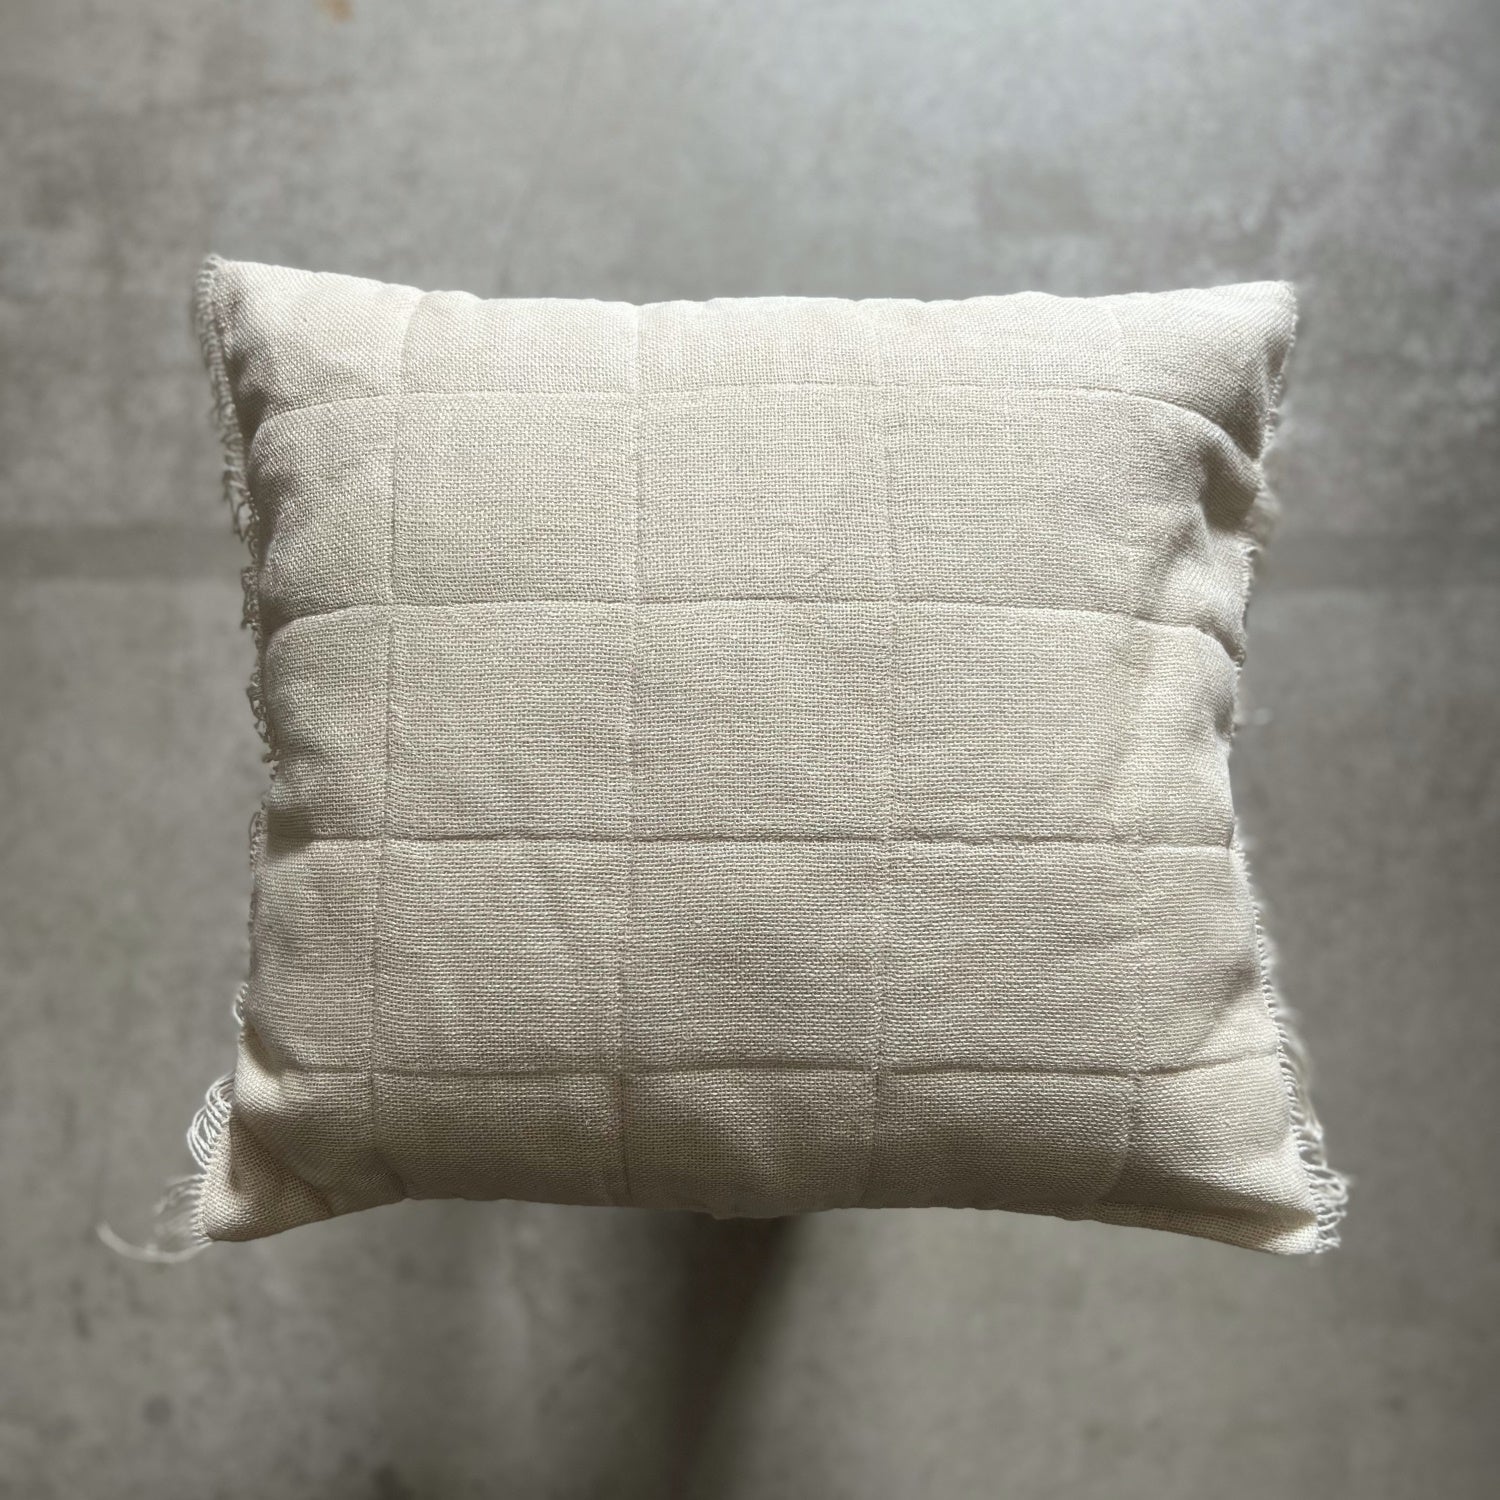 Handcrafted quilted linen cushion in cream 50x50 cm